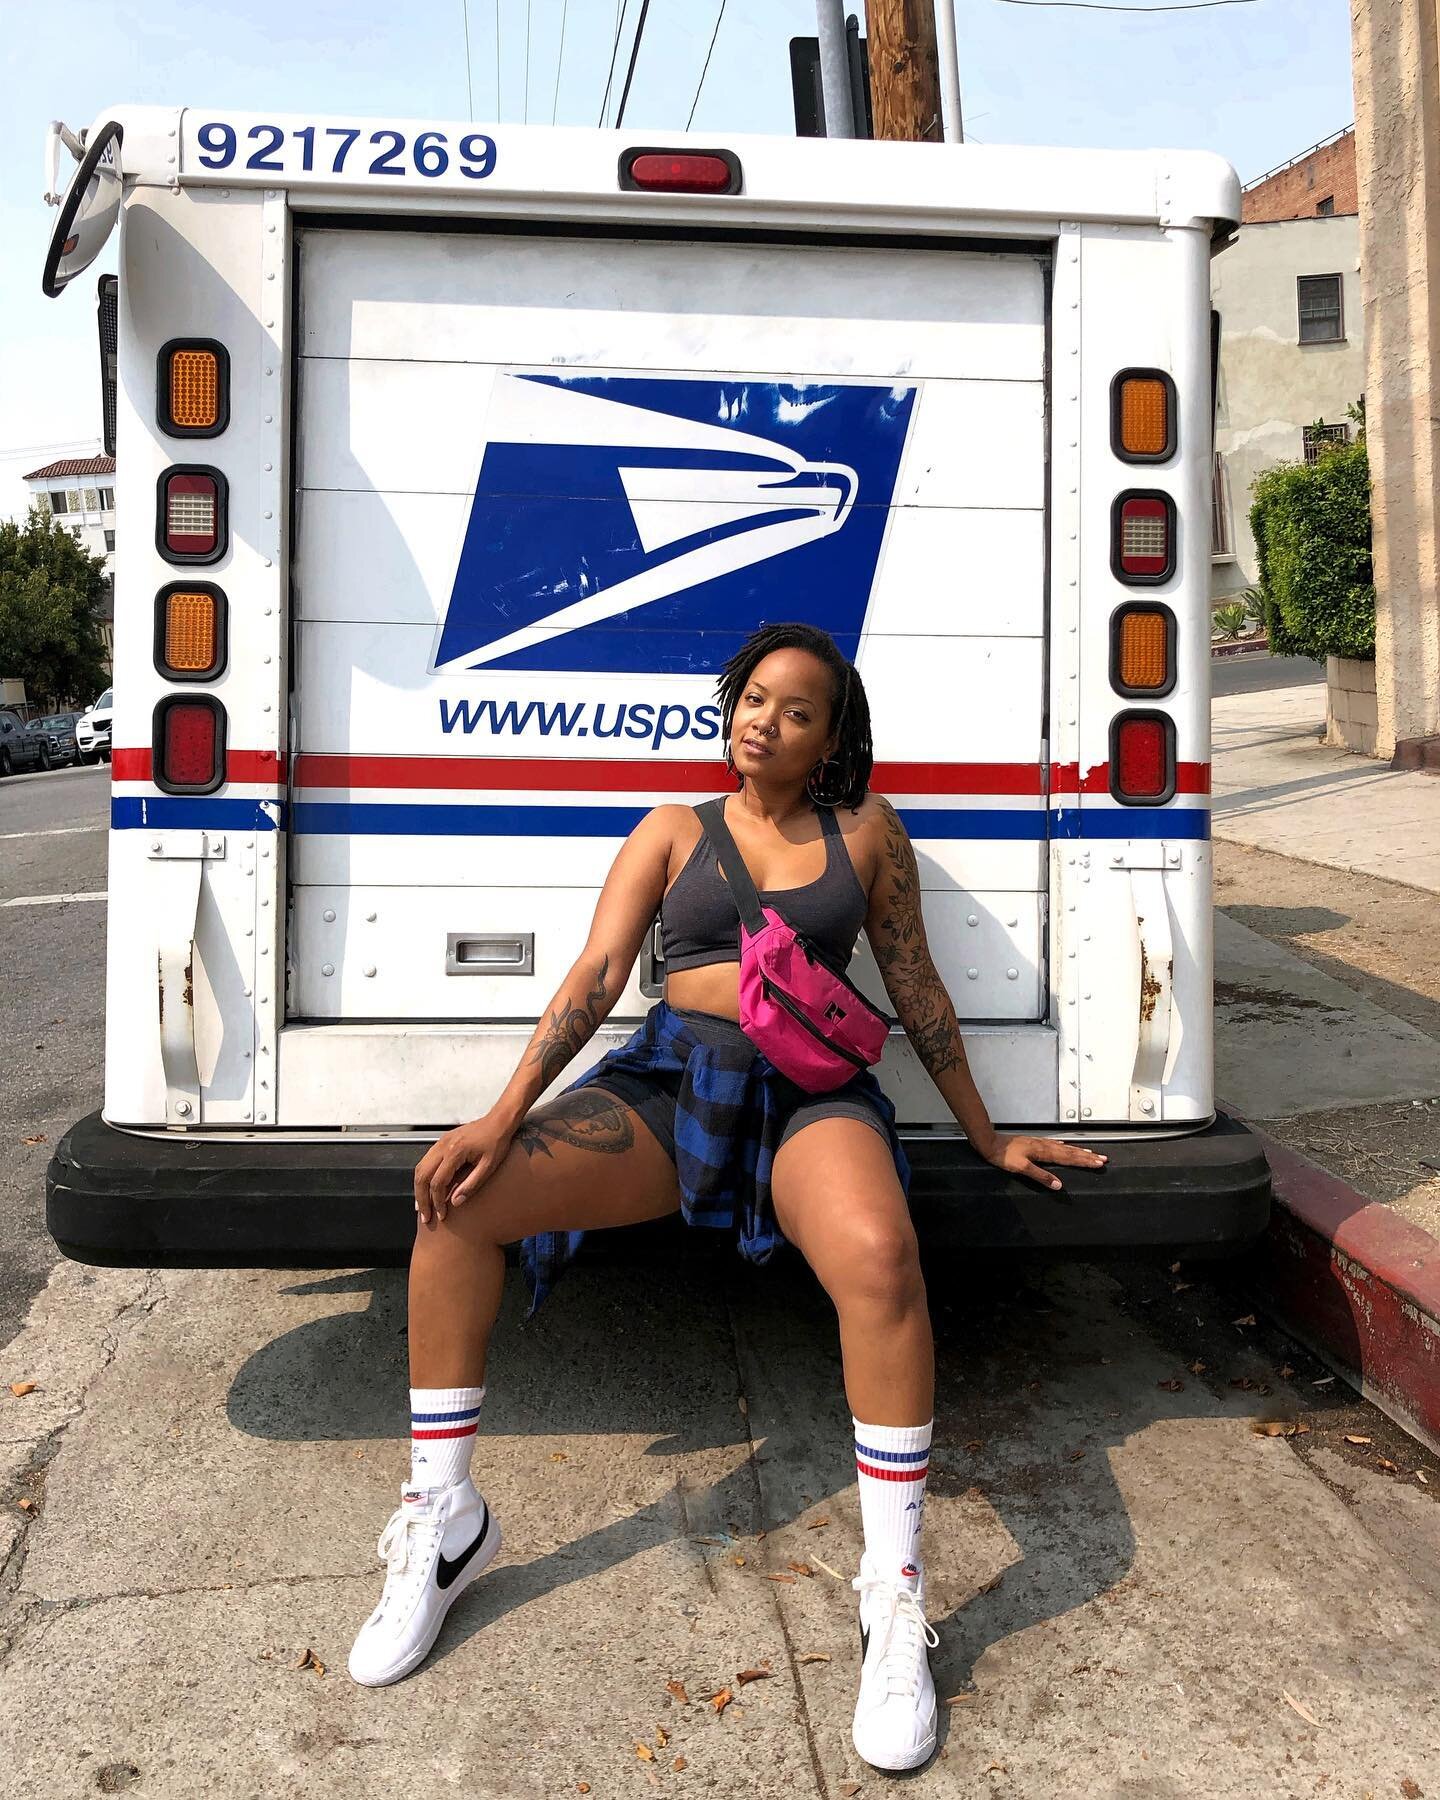 Y&rsquo;all buying stamps so we can save @uspostalservice? -cause they BROKE!⁣
⁣
Did you know that the postal office helped create a Black middle class? ⁣
⁣
Did you know the 1st Black woman to work for the postal office was a BADASS from Montana?(swi